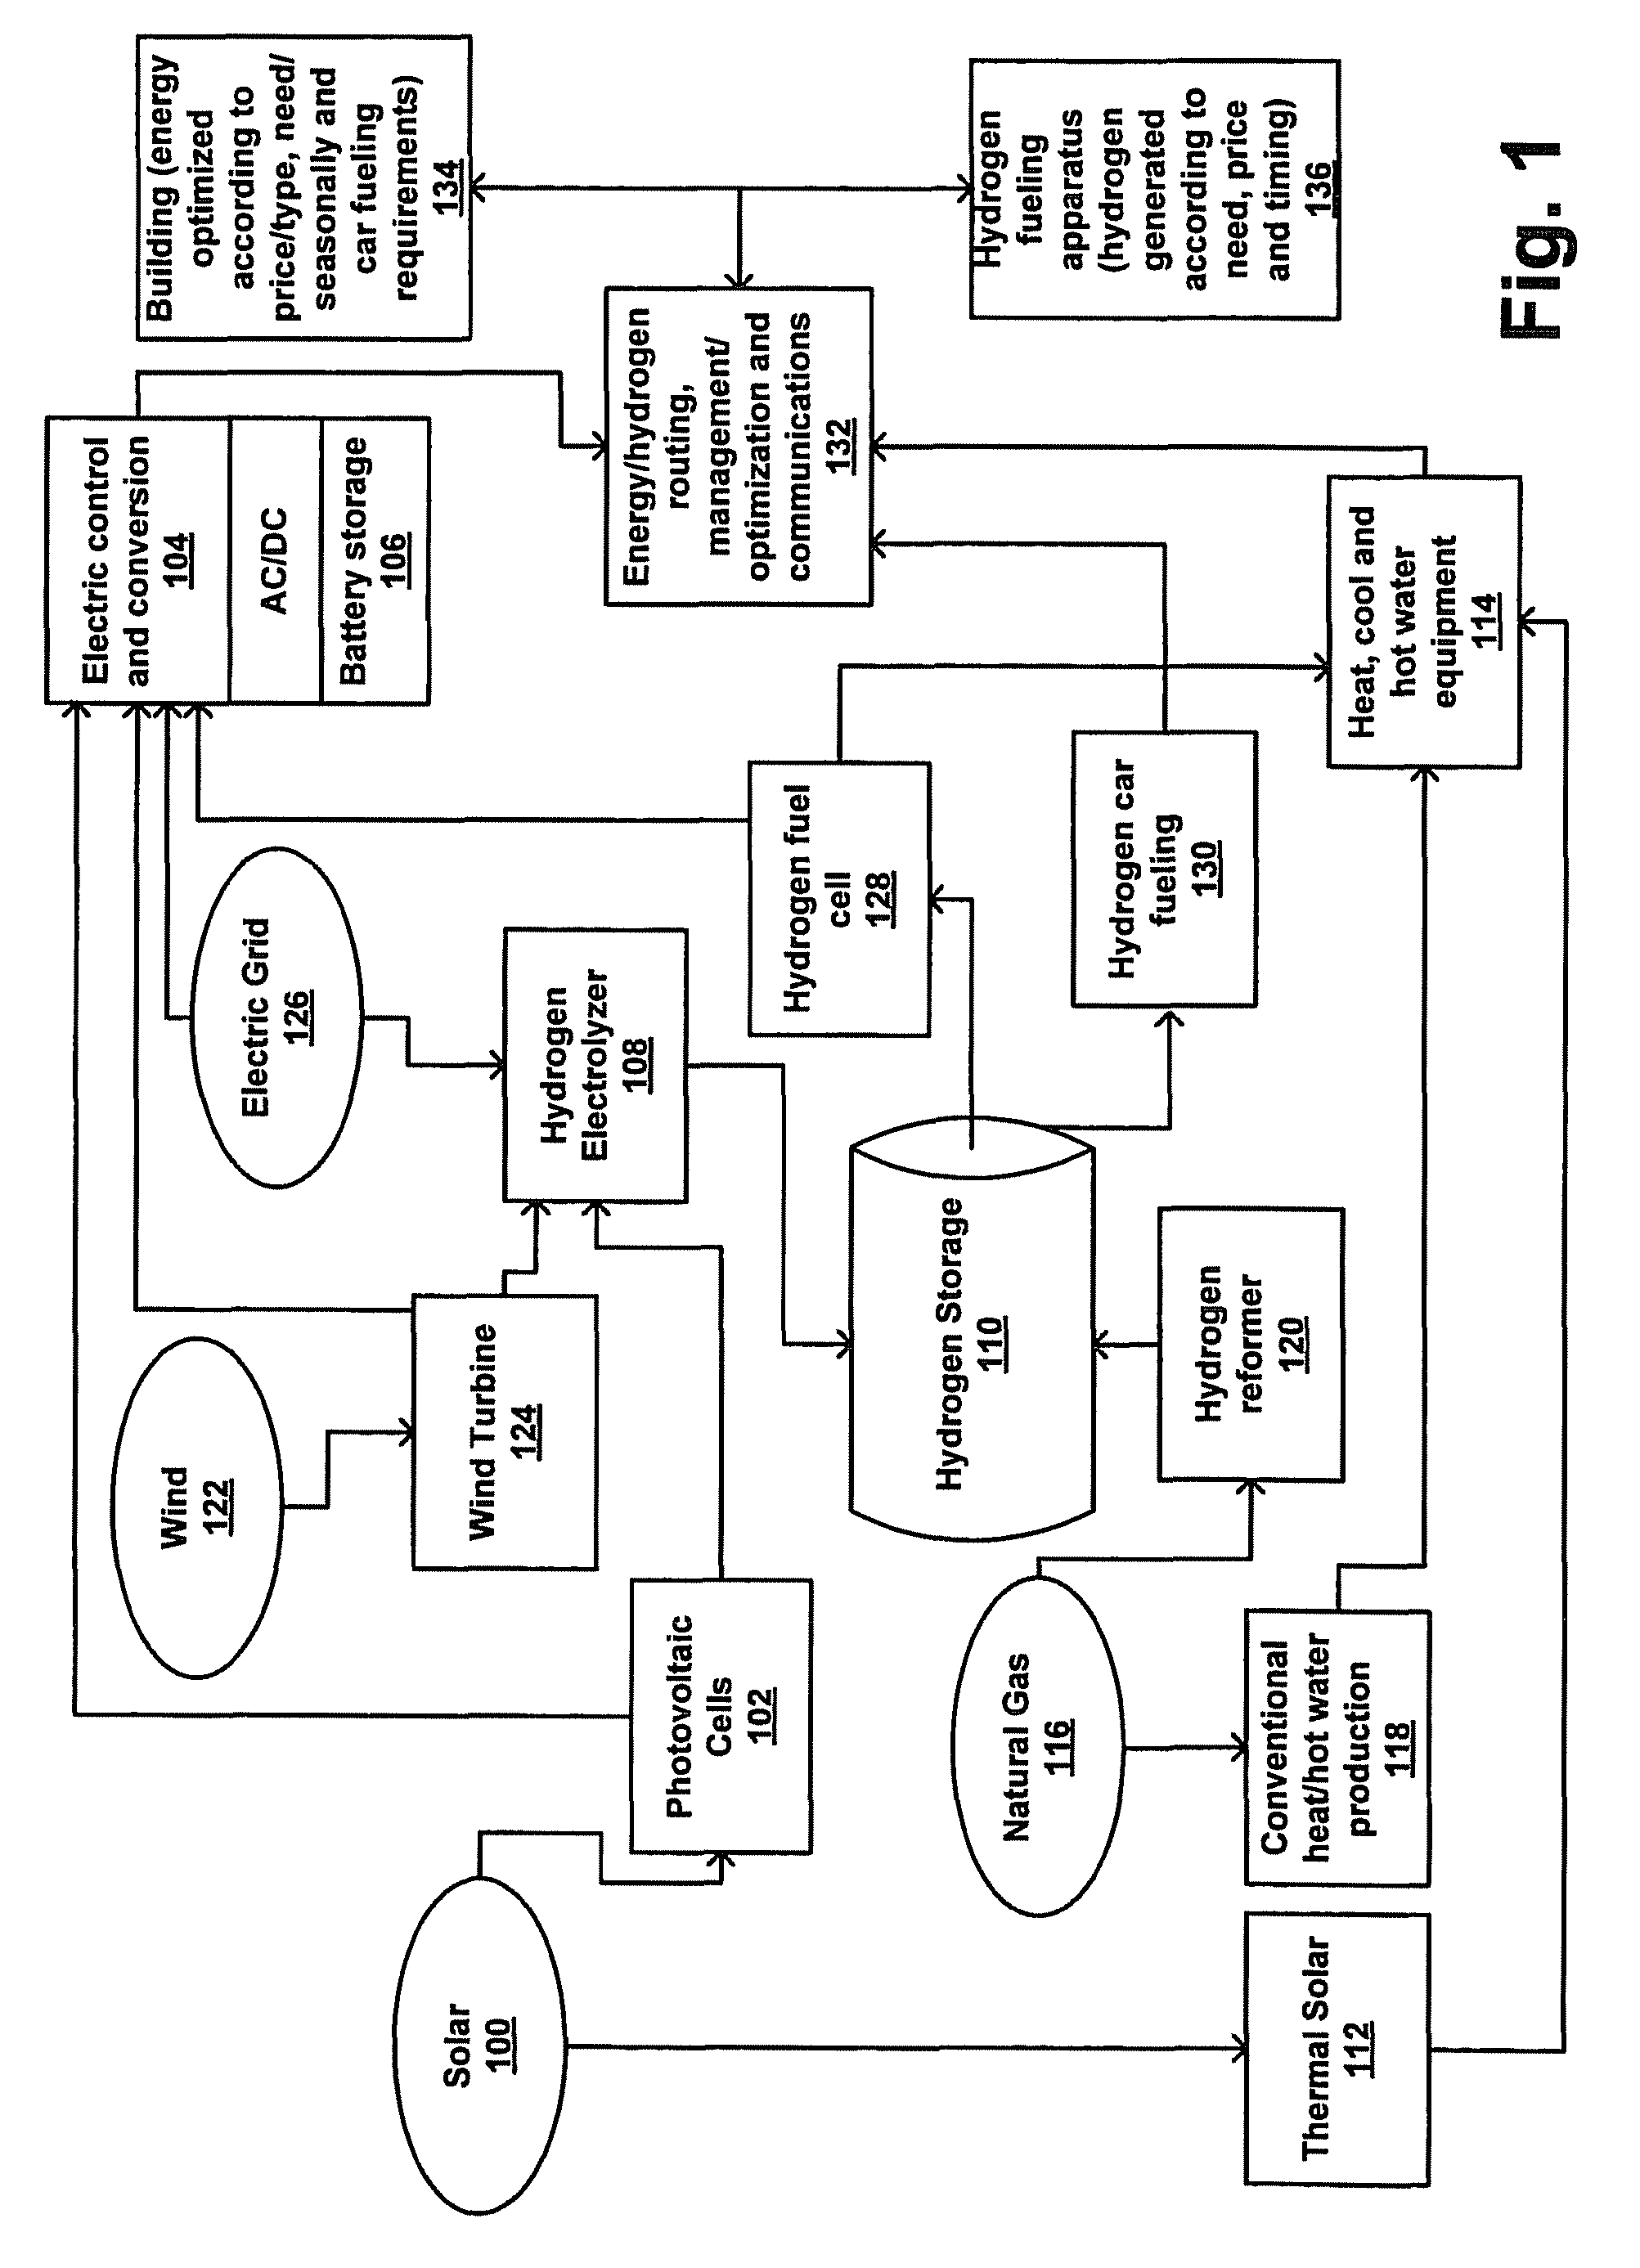 Method and apparatus for optimization of distributed generation